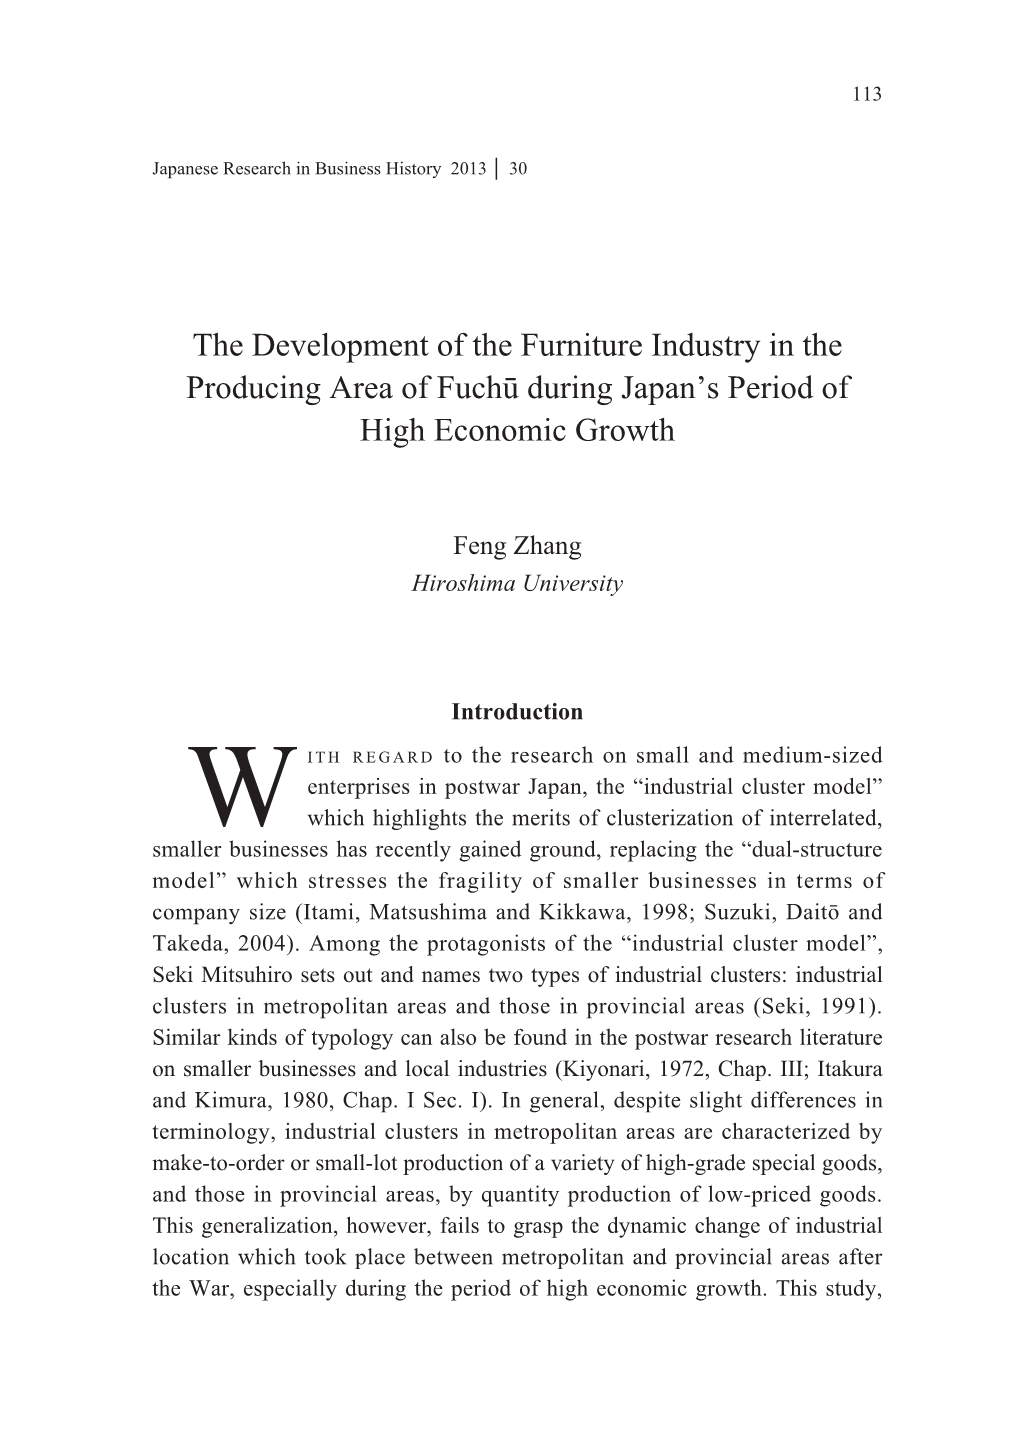 The Development of the Furniture Industry in the Producing Area of Fuchū During Japan’S Period of High Economic Growth